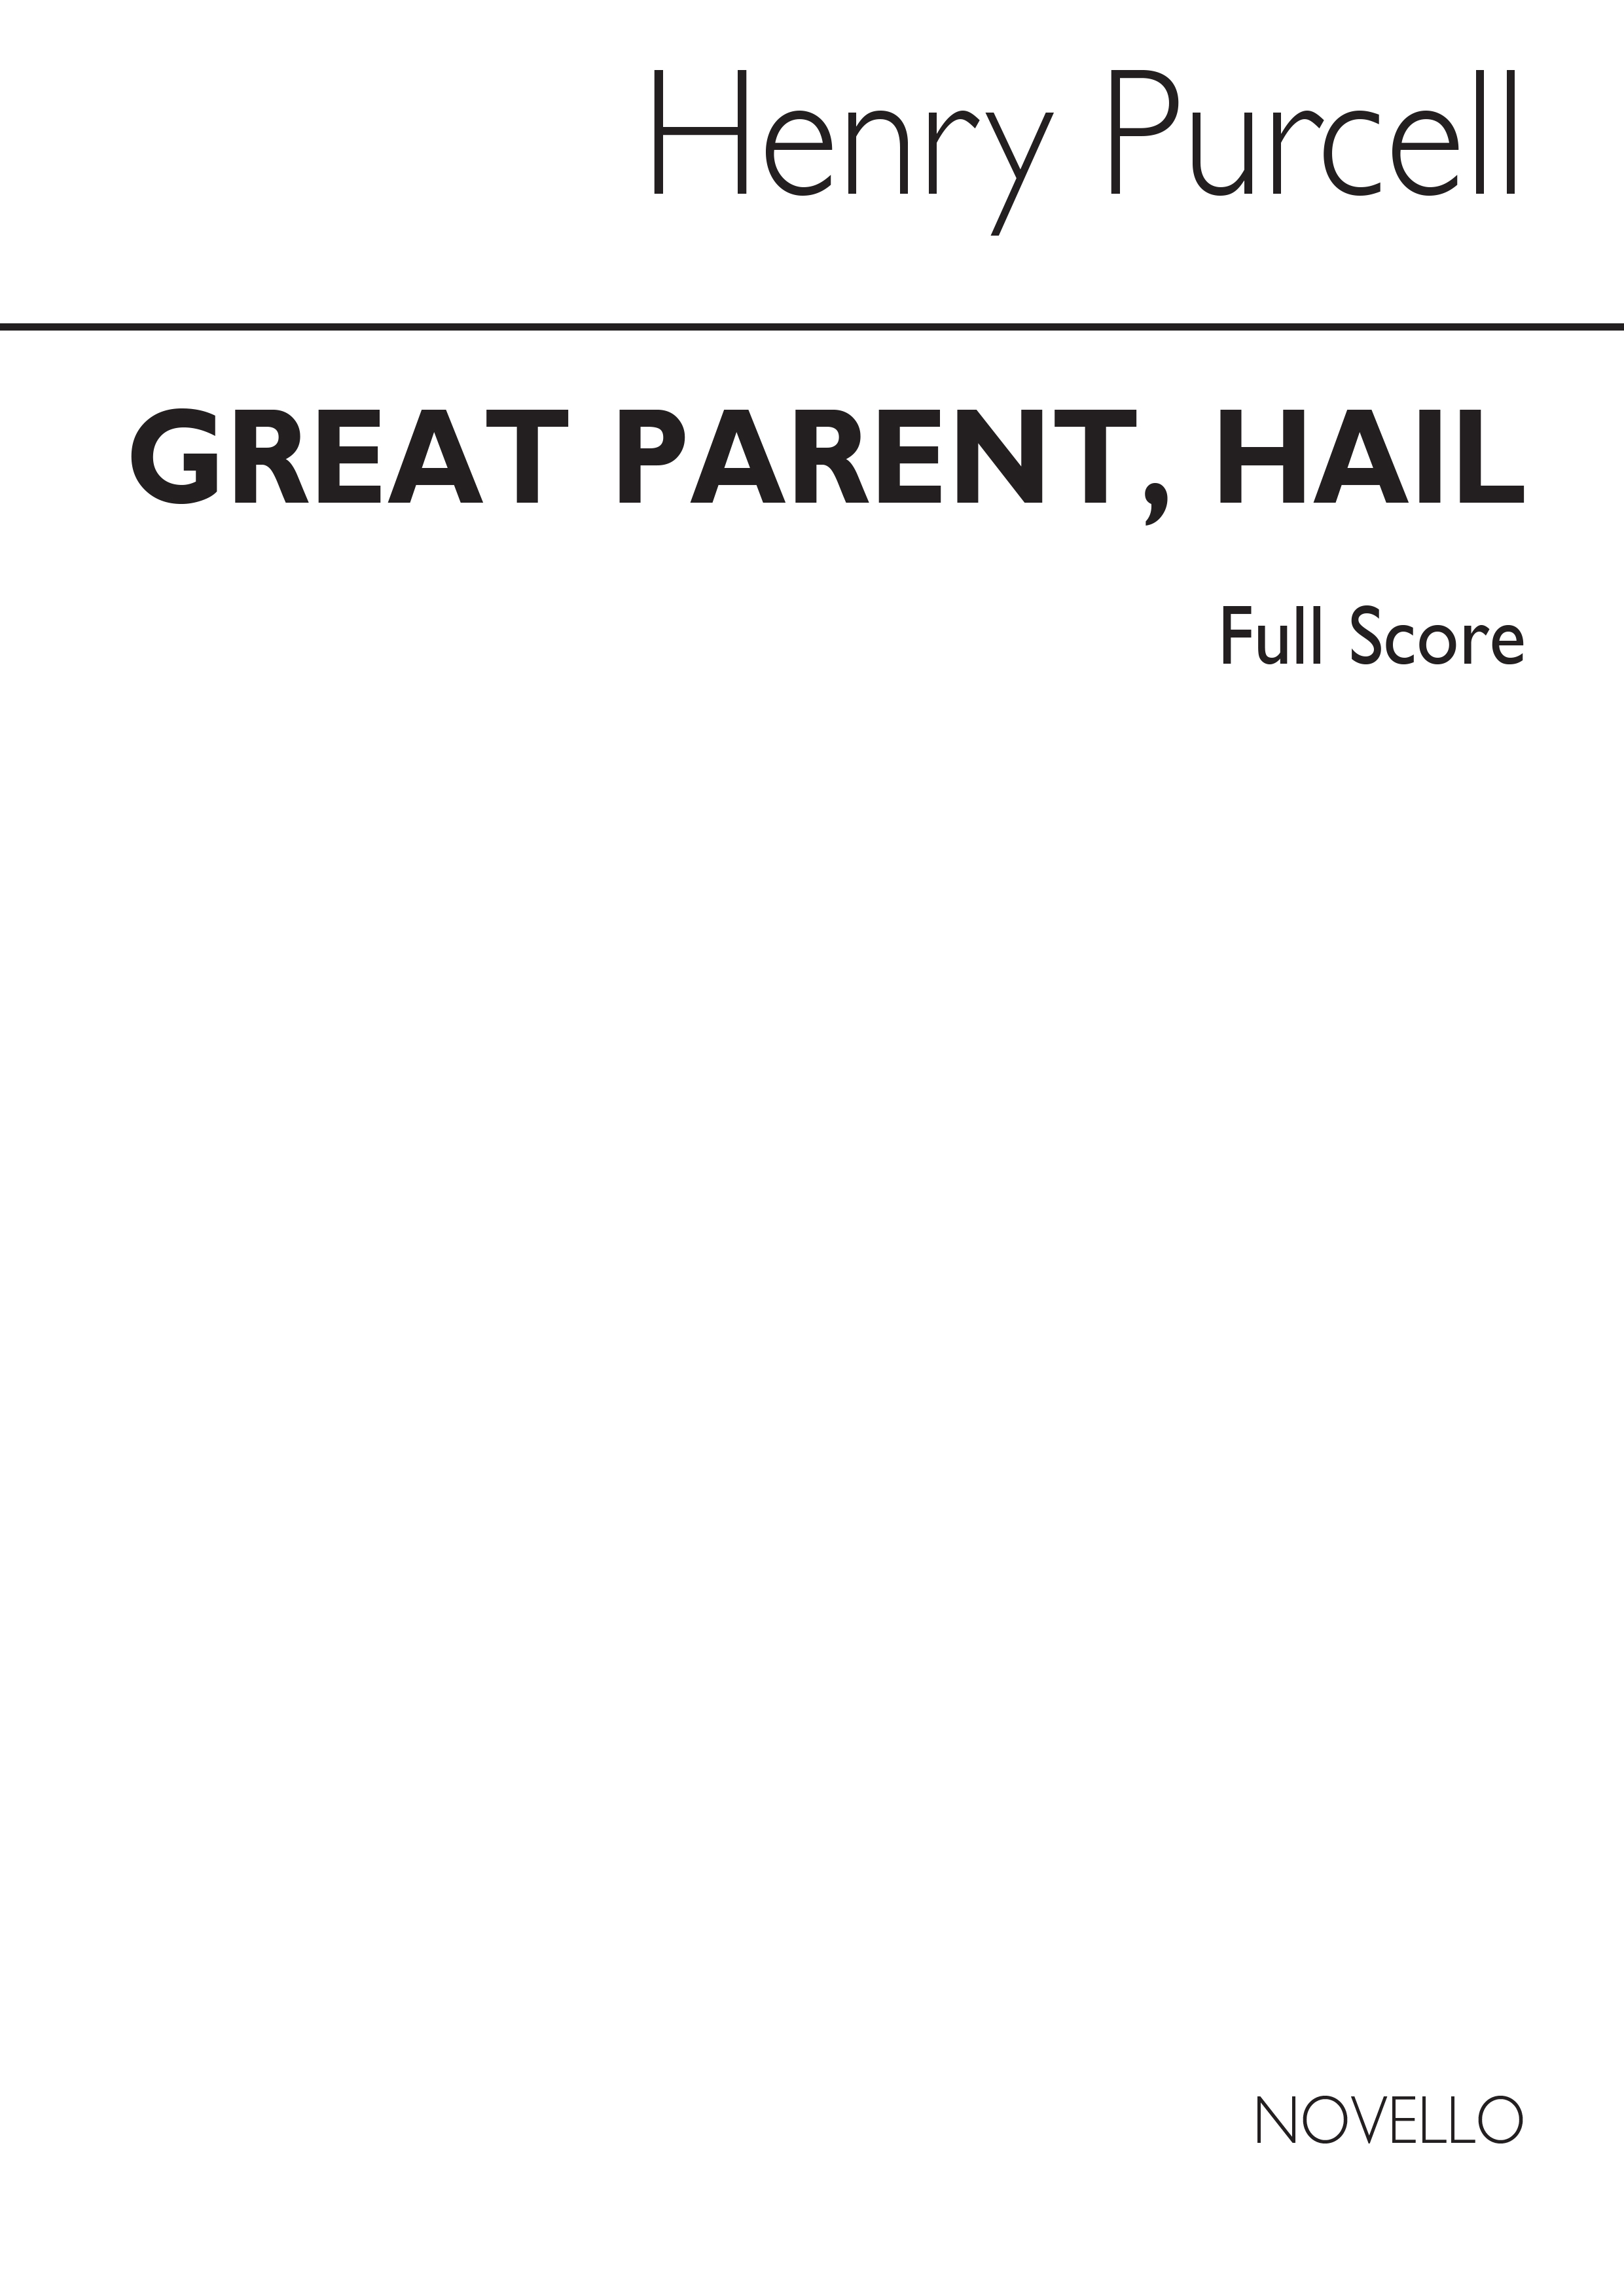 Henry Purcell: Great Parent, Hail In Full Score